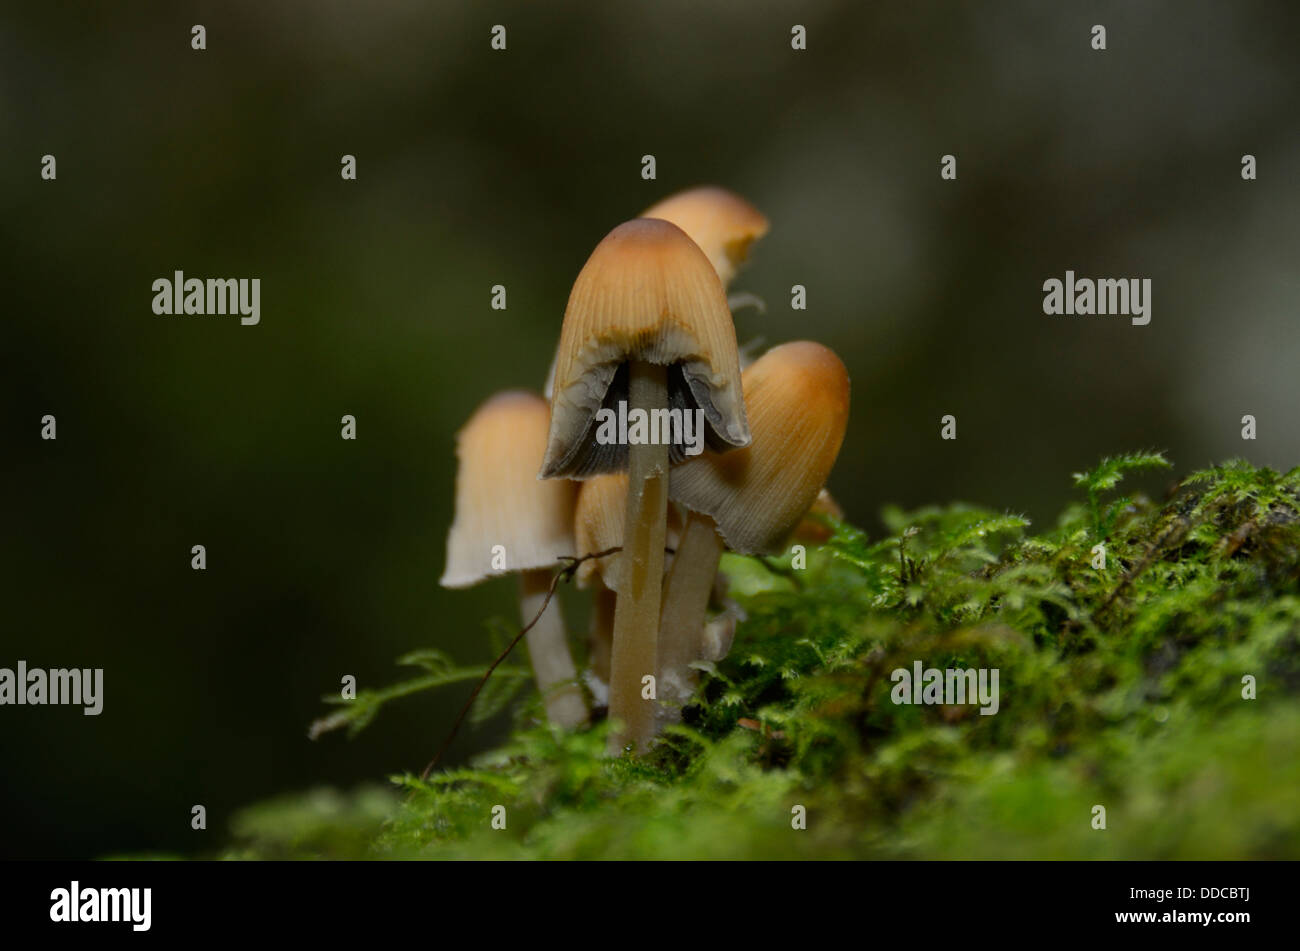 Inkcap Mushrooms on a bed of Lichen Stock Photo